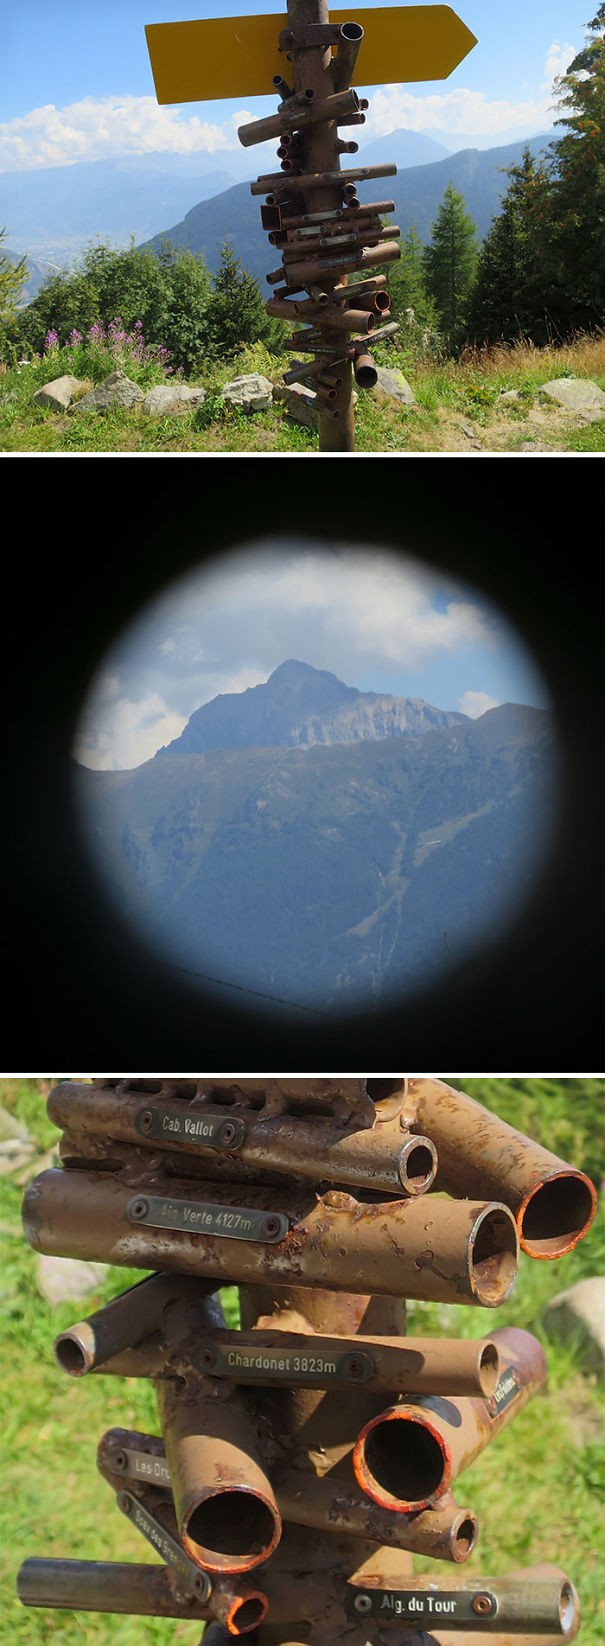 Which mountain peak would you like to see? This device in Switzerland makes it easier for you to distinguish them!